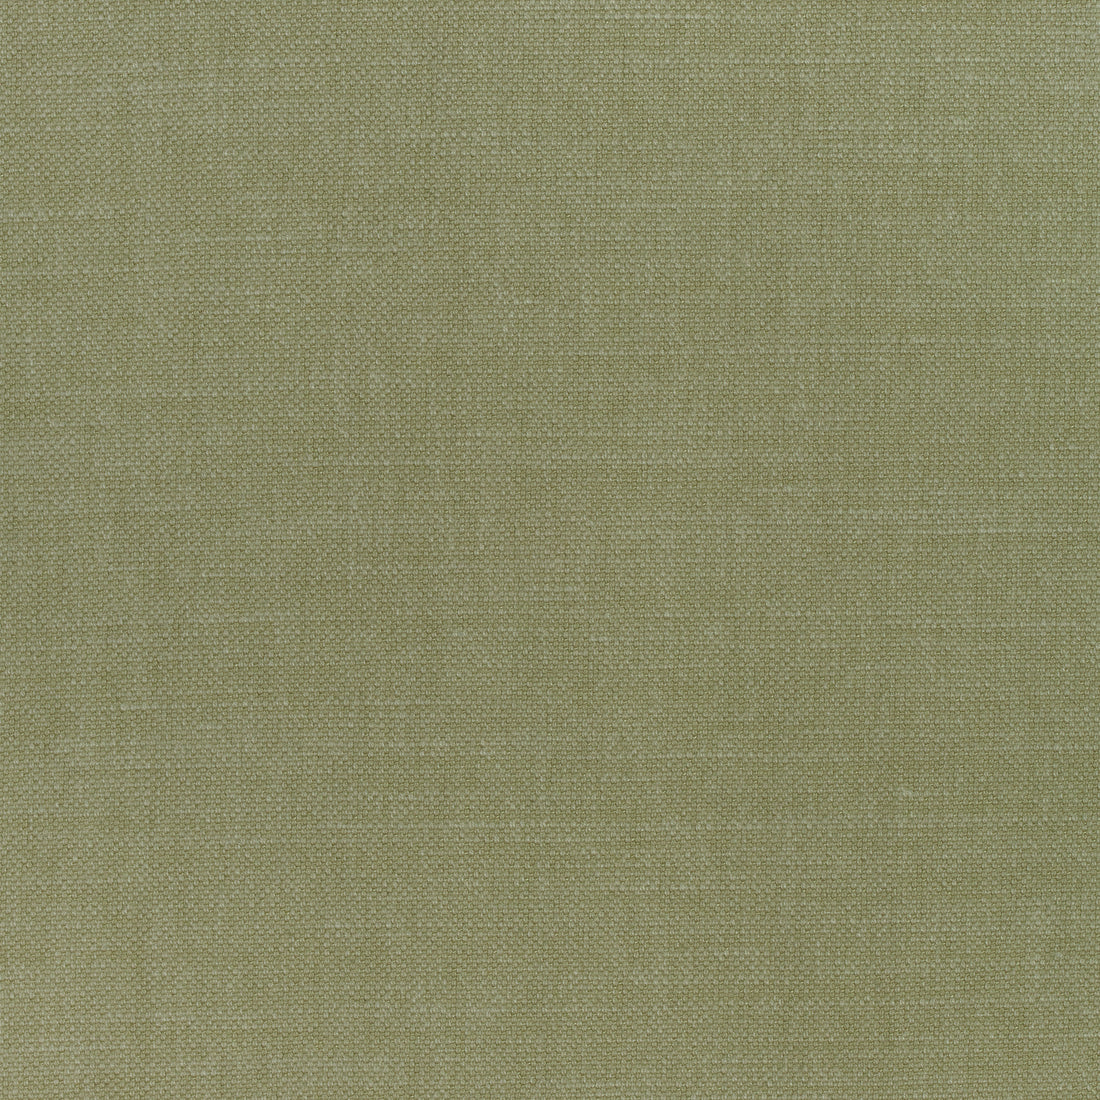 Prisma fabric in moss color - pattern number W70137 - by Thibaut in the Woven Resource Vol 12 Prisma Fabrics collection